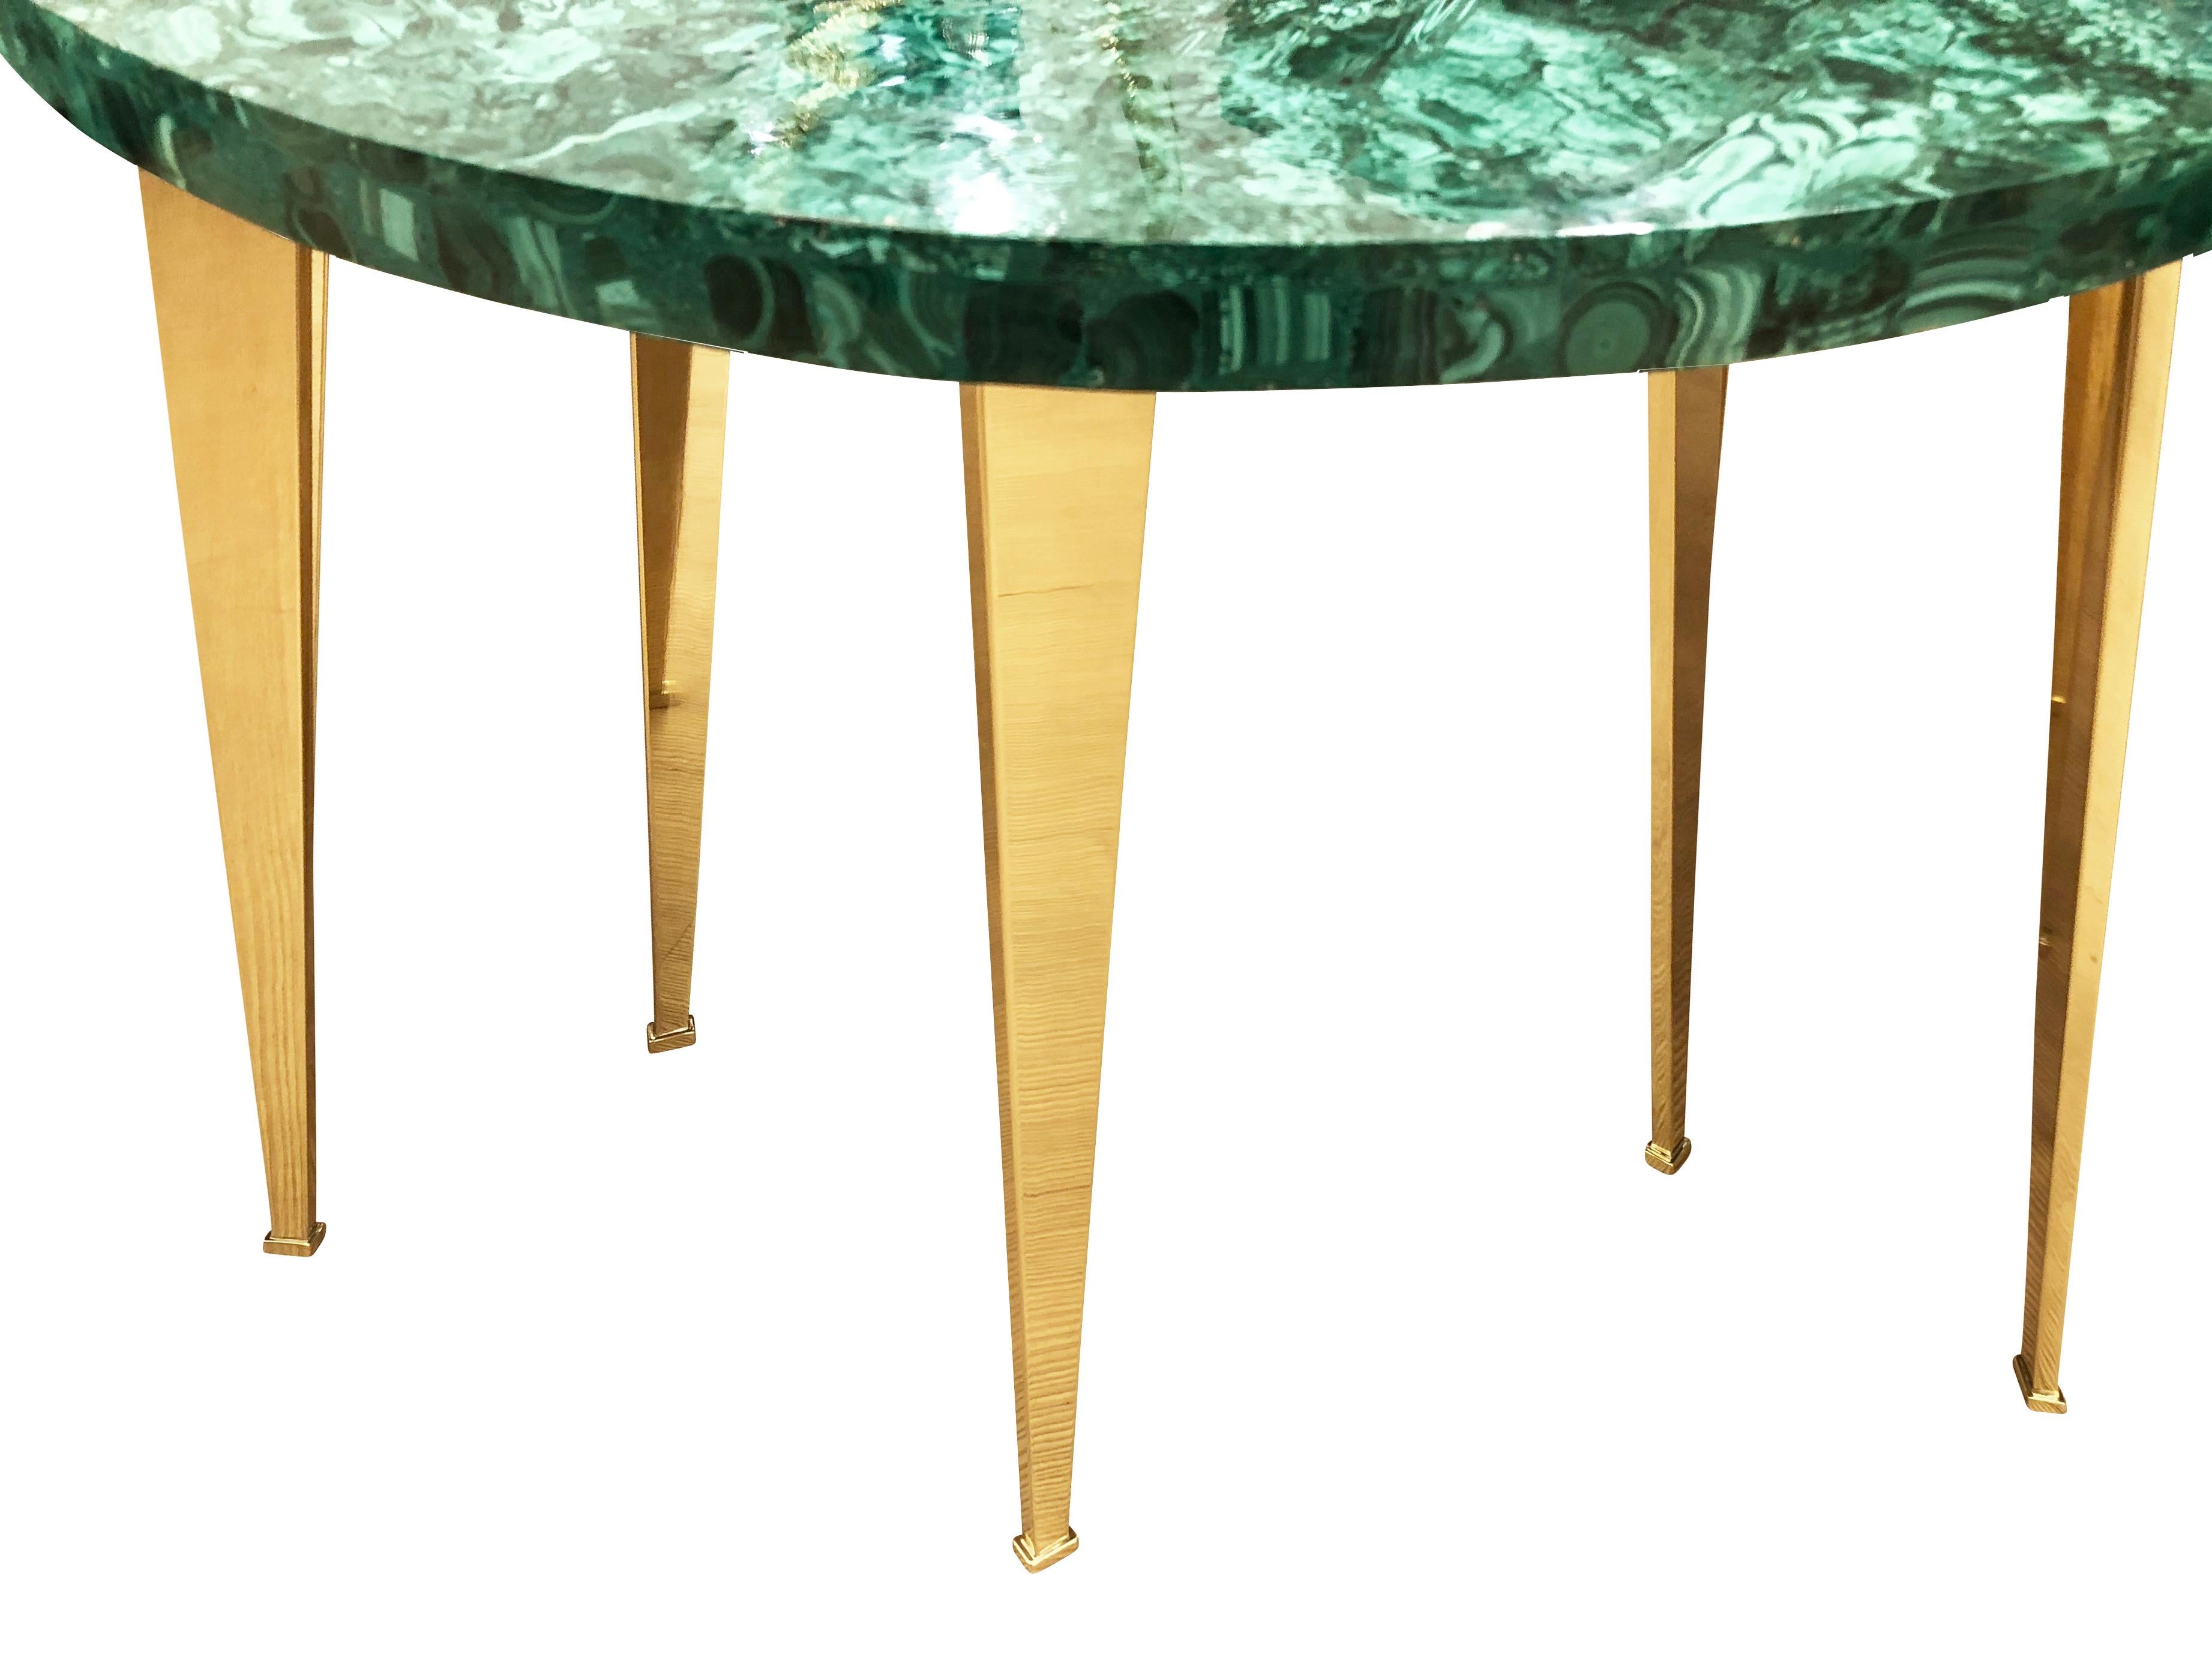 Italian Malachite Coffee Table or Side Tables by Forma for Gaspare Asaro